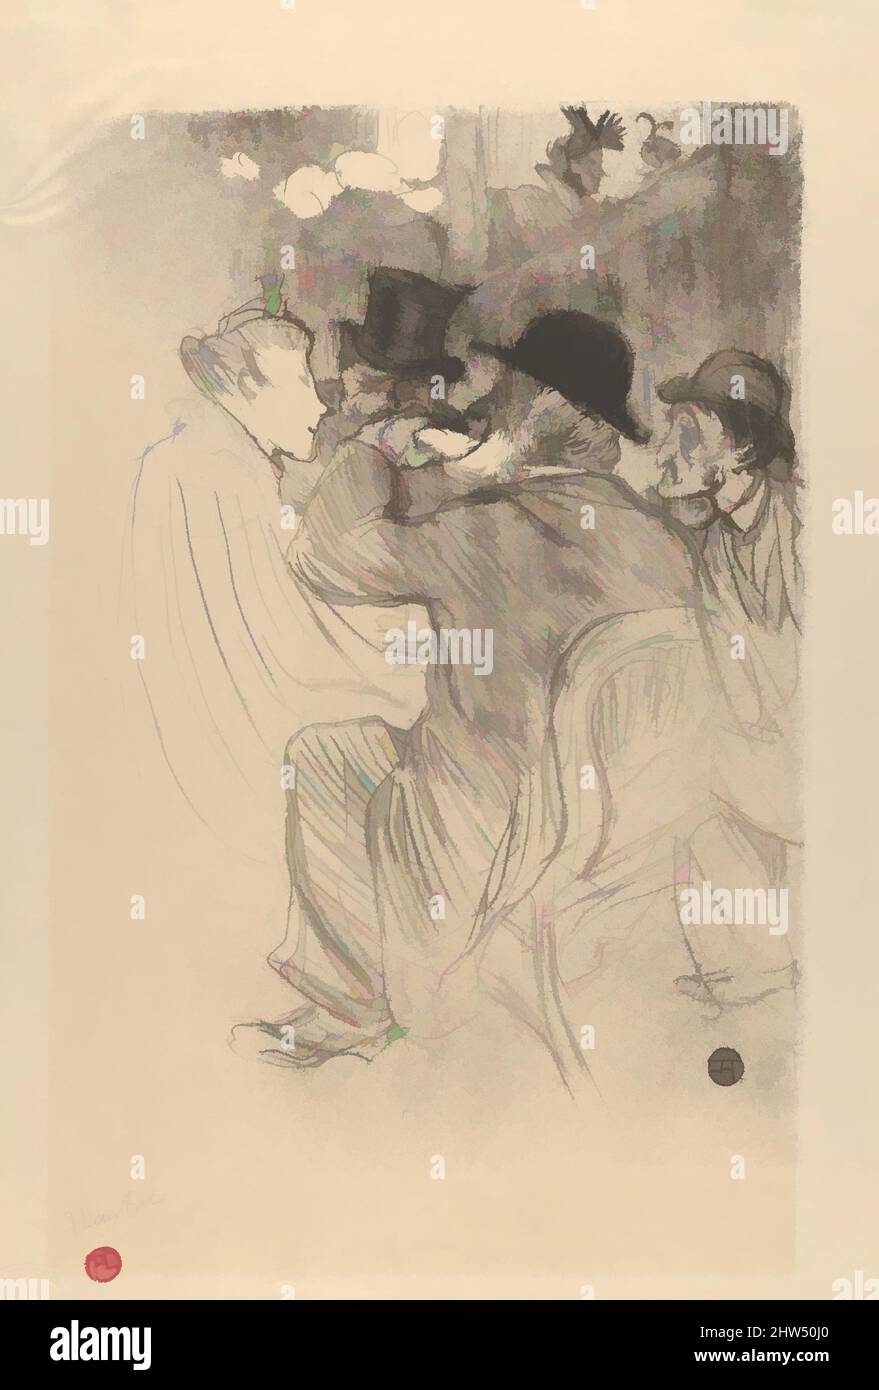 Art inspired by Au Moulin Rouge: Un Rude! Un Vrai Rude!, 1893, Crayon, brush, and spatter lithograph with scraper printed in black on imitation japan paper; only state, Image: 14 5/16 × 10 1/16 in. (36.3 × 25.5 cm), Prints, Henri de Toulouse-Lautrec (French, Albi 1864–1901 Saint-André-, Classic works modernized by Artotop with a splash of modernity. Shapes, color and value, eye-catching visual impact on art. Emotions through freedom of artworks in a contemporary way. A timeless message pursuing a wildly creative new direction. Artists turning to the digital medium and creating the Artotop NFT Stock Photo